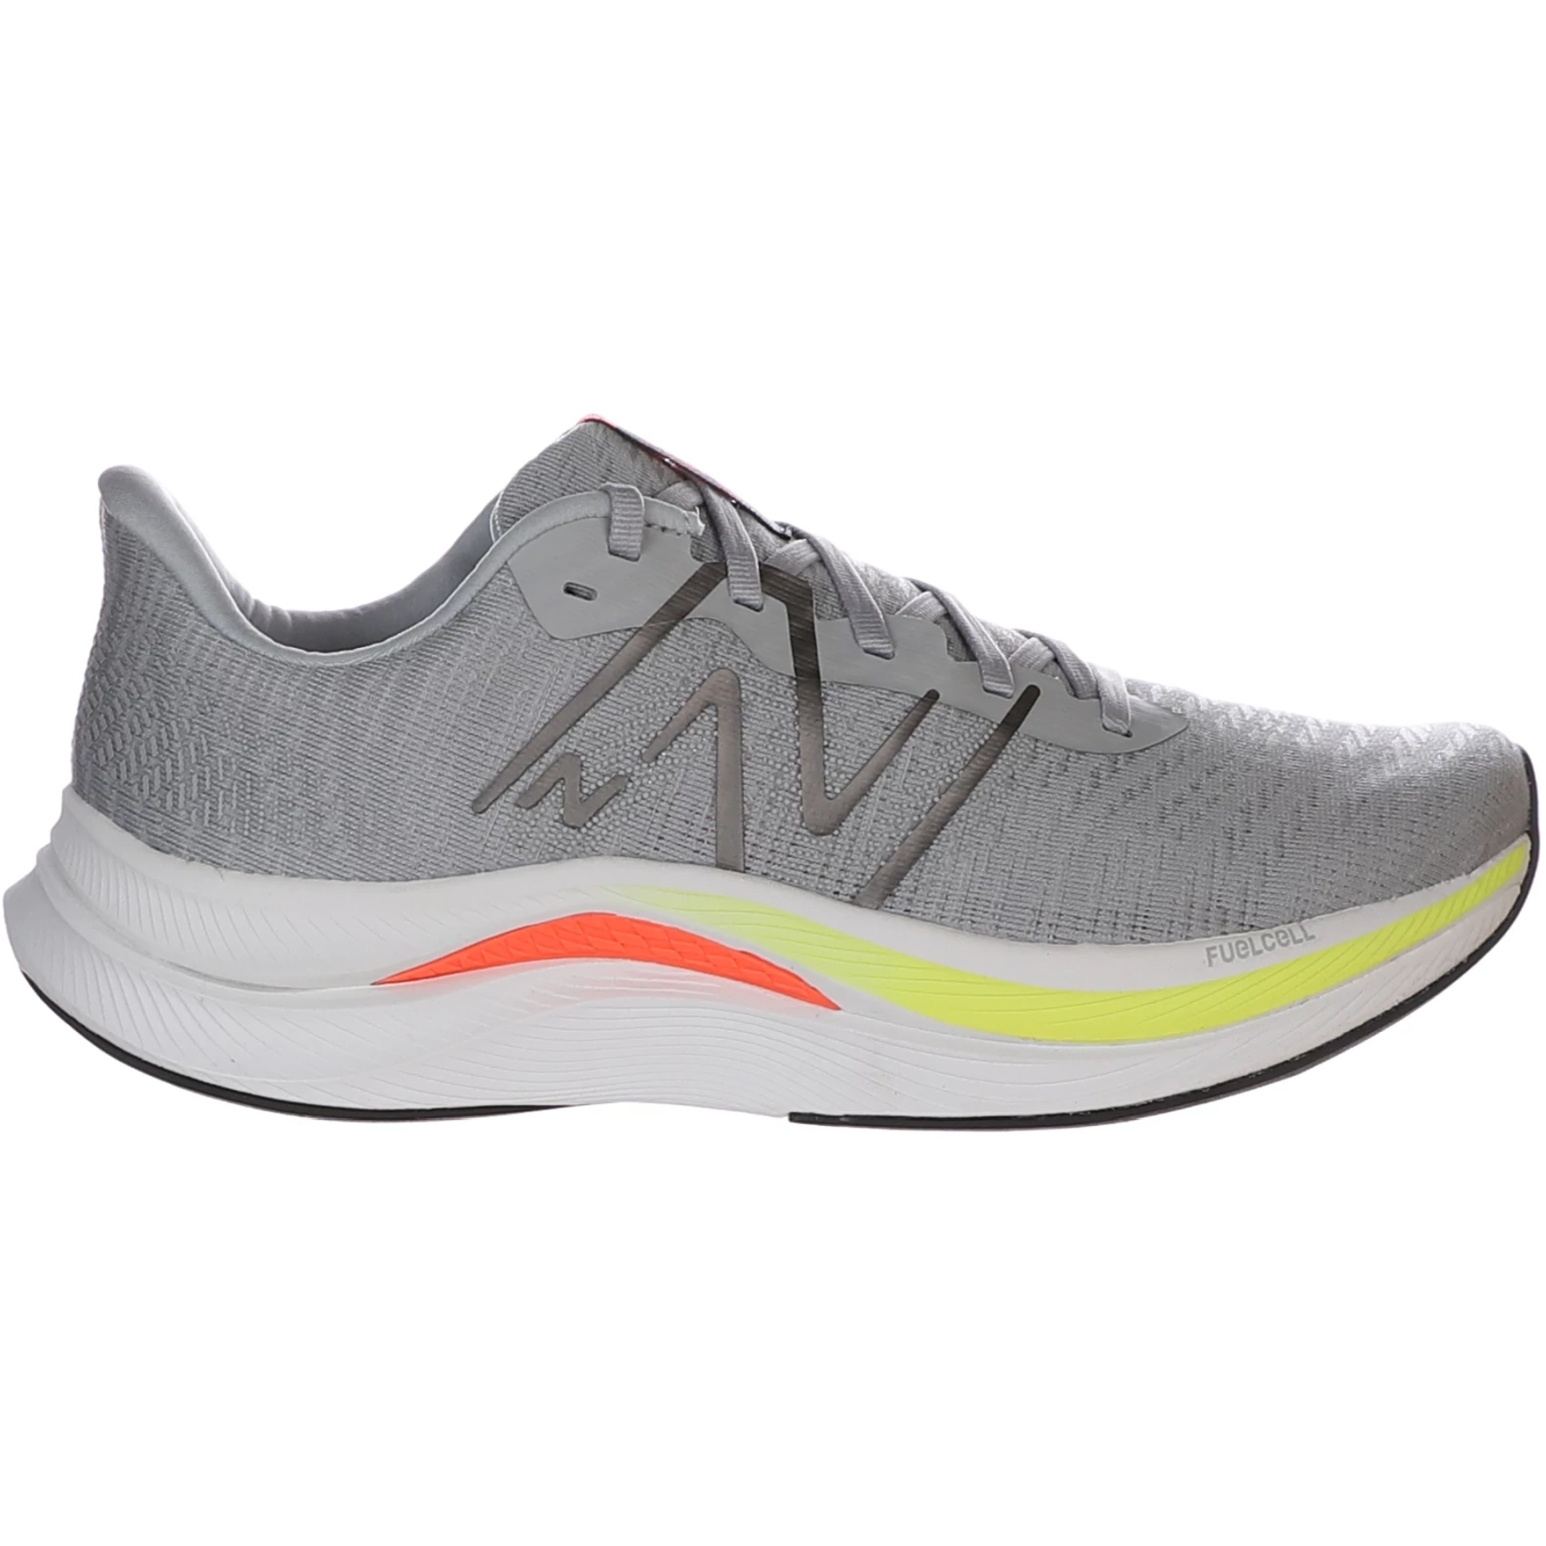 Picture of New Balance FuelCell Propel v4 Running Shoes - Quartz Grey